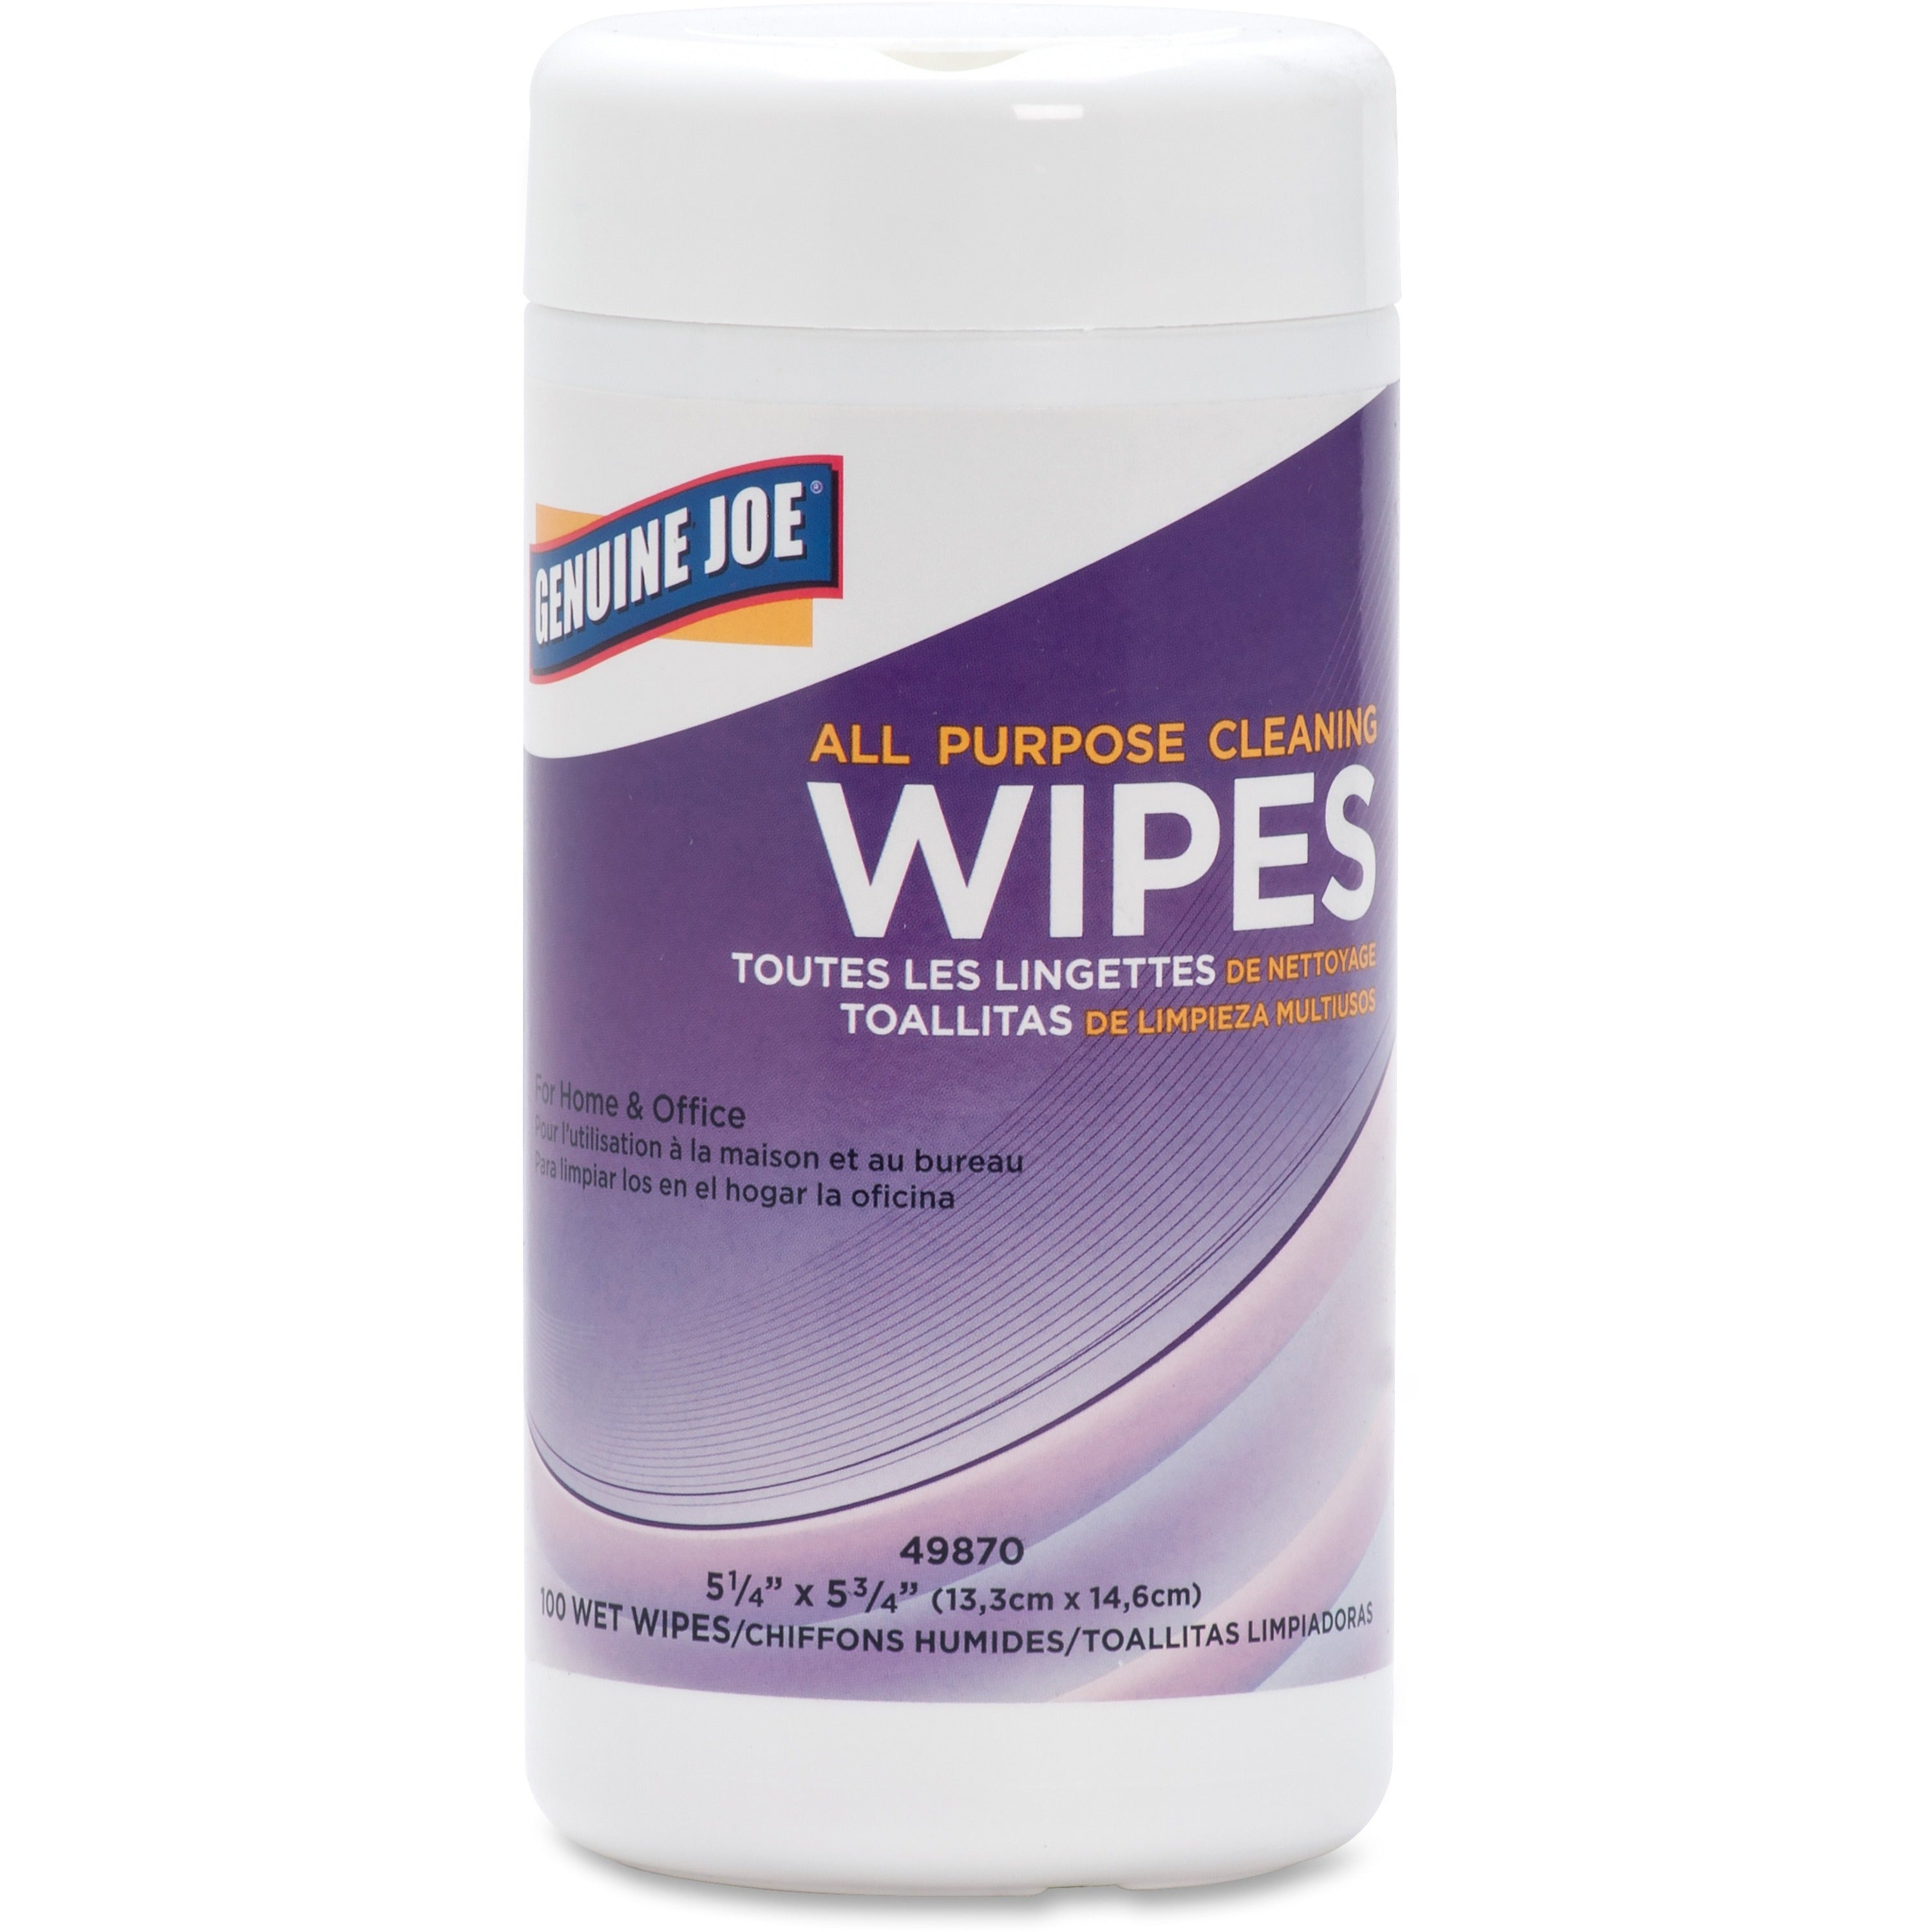 Genuine Joe All Purpose Cleaning Wipes - 5.88" Length x 5.13" Width - 100 / Canister - 1 Each - Pre-moistened, Non-abrasive, Non-toxic, Soft, Easy to Use - 